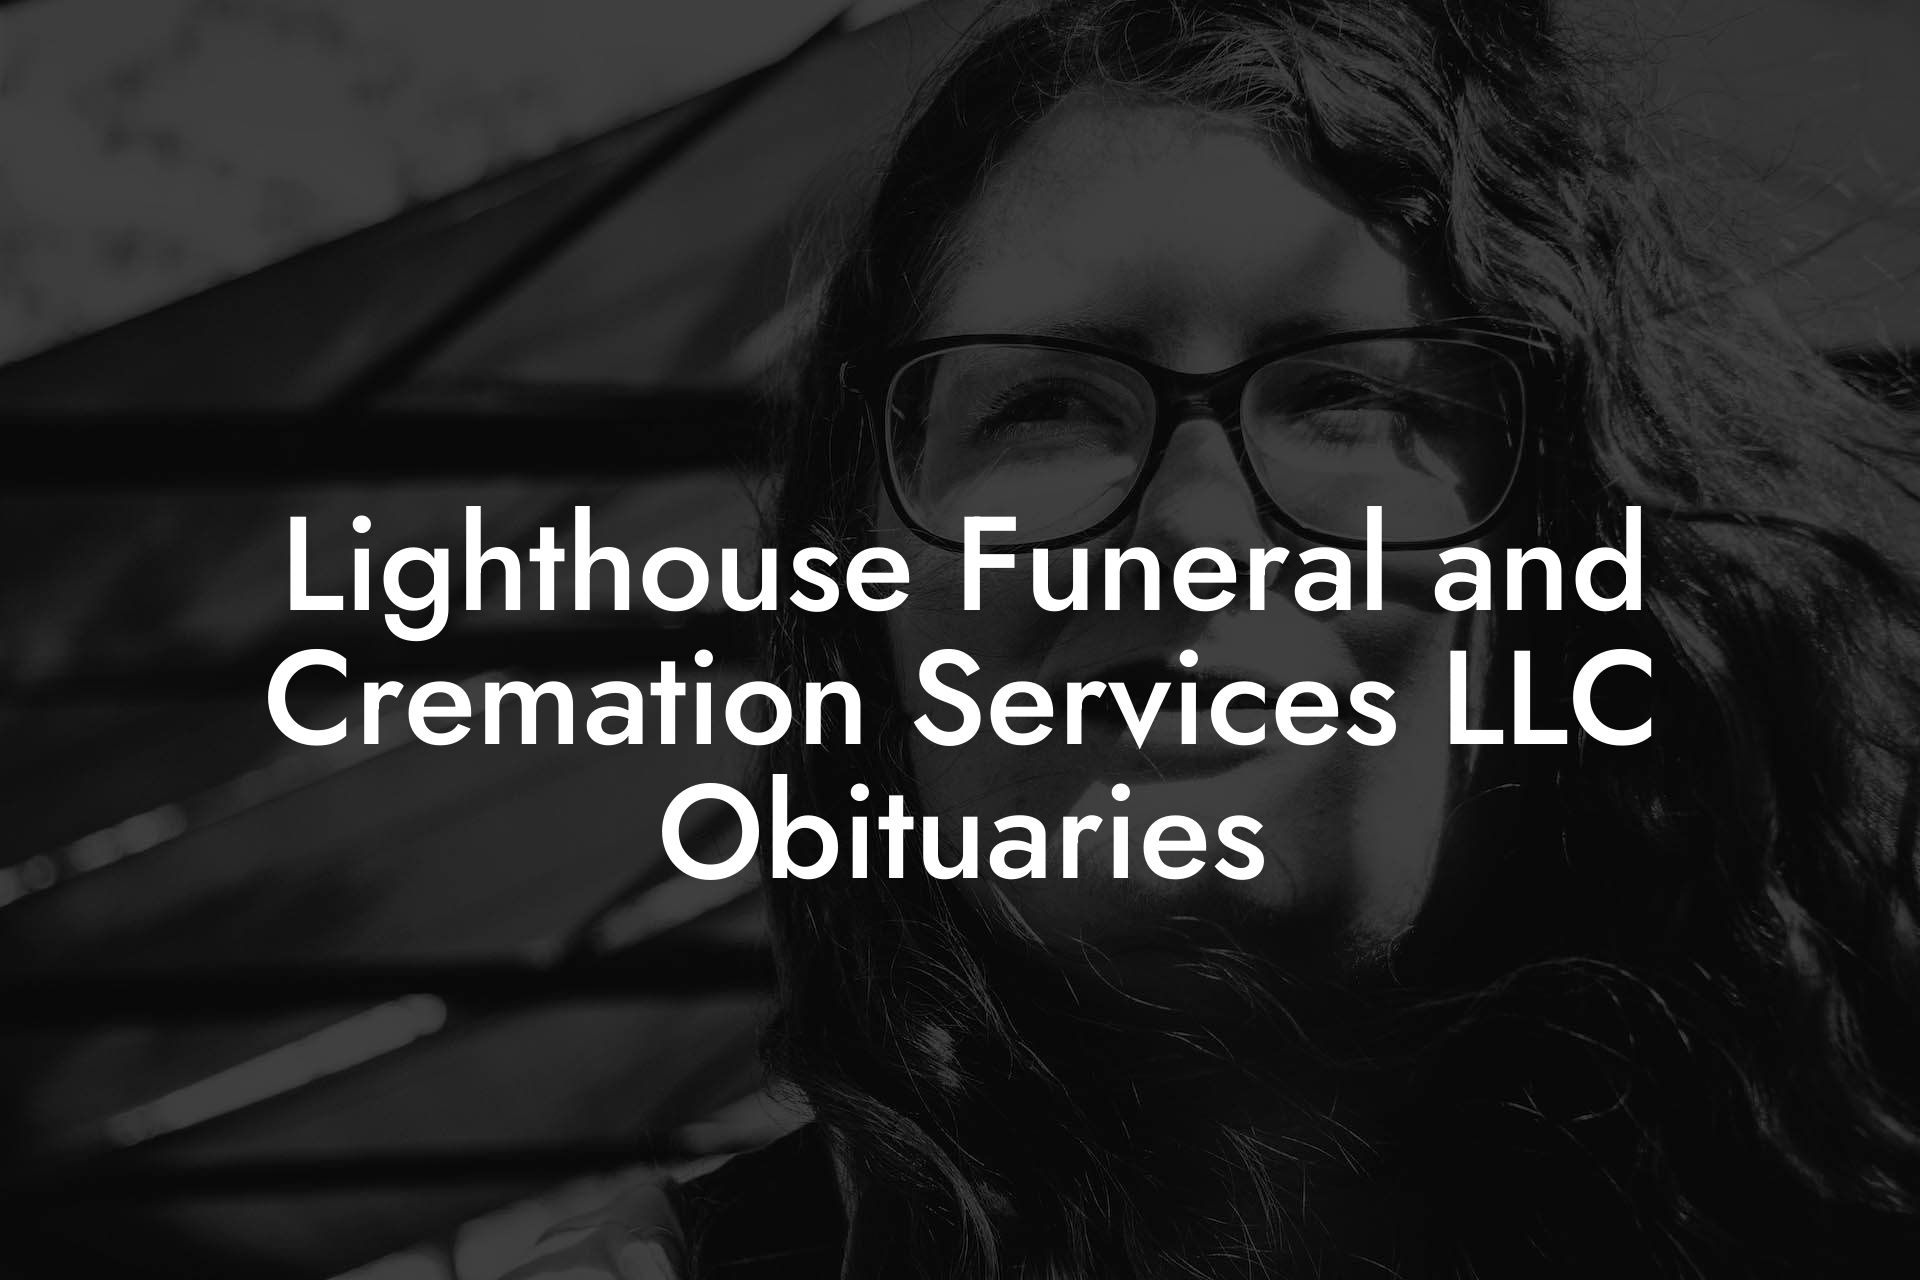 Lighthouse Funeral and Cremation Services LLC Obituaries